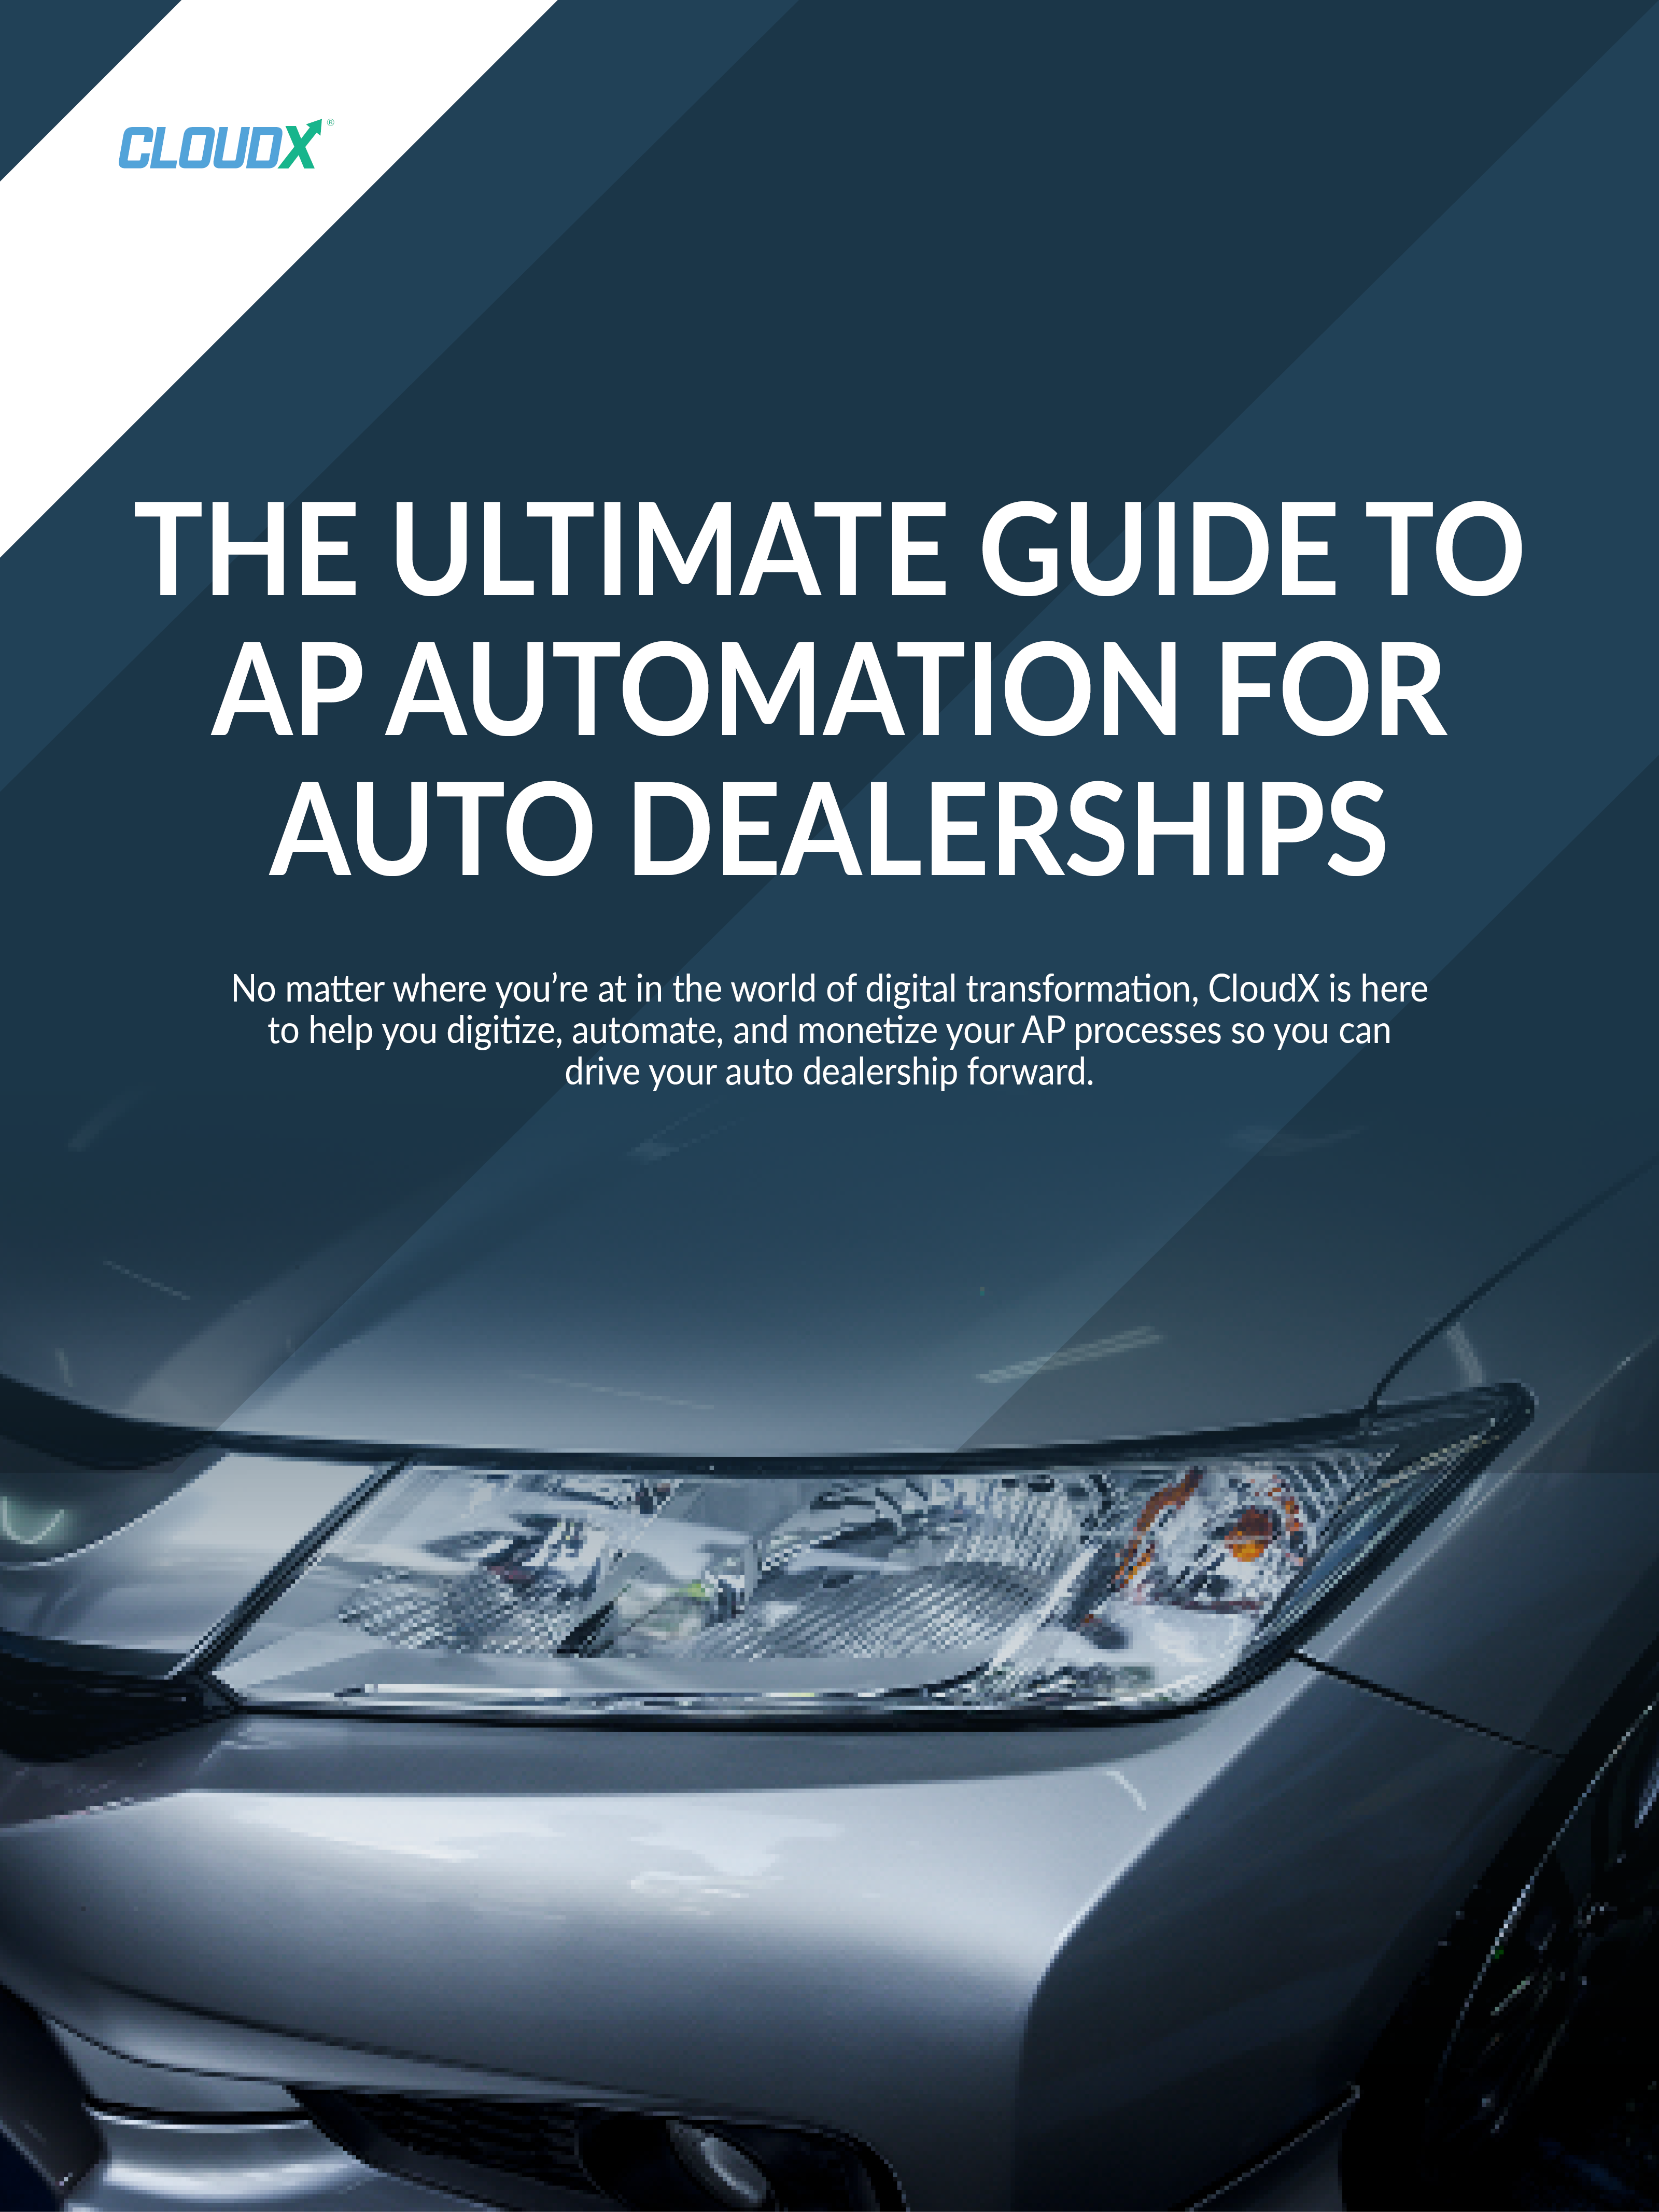 The Ultimate Guide to AP Automation for Auto Dealerships - E-book (CloudX)-v.3